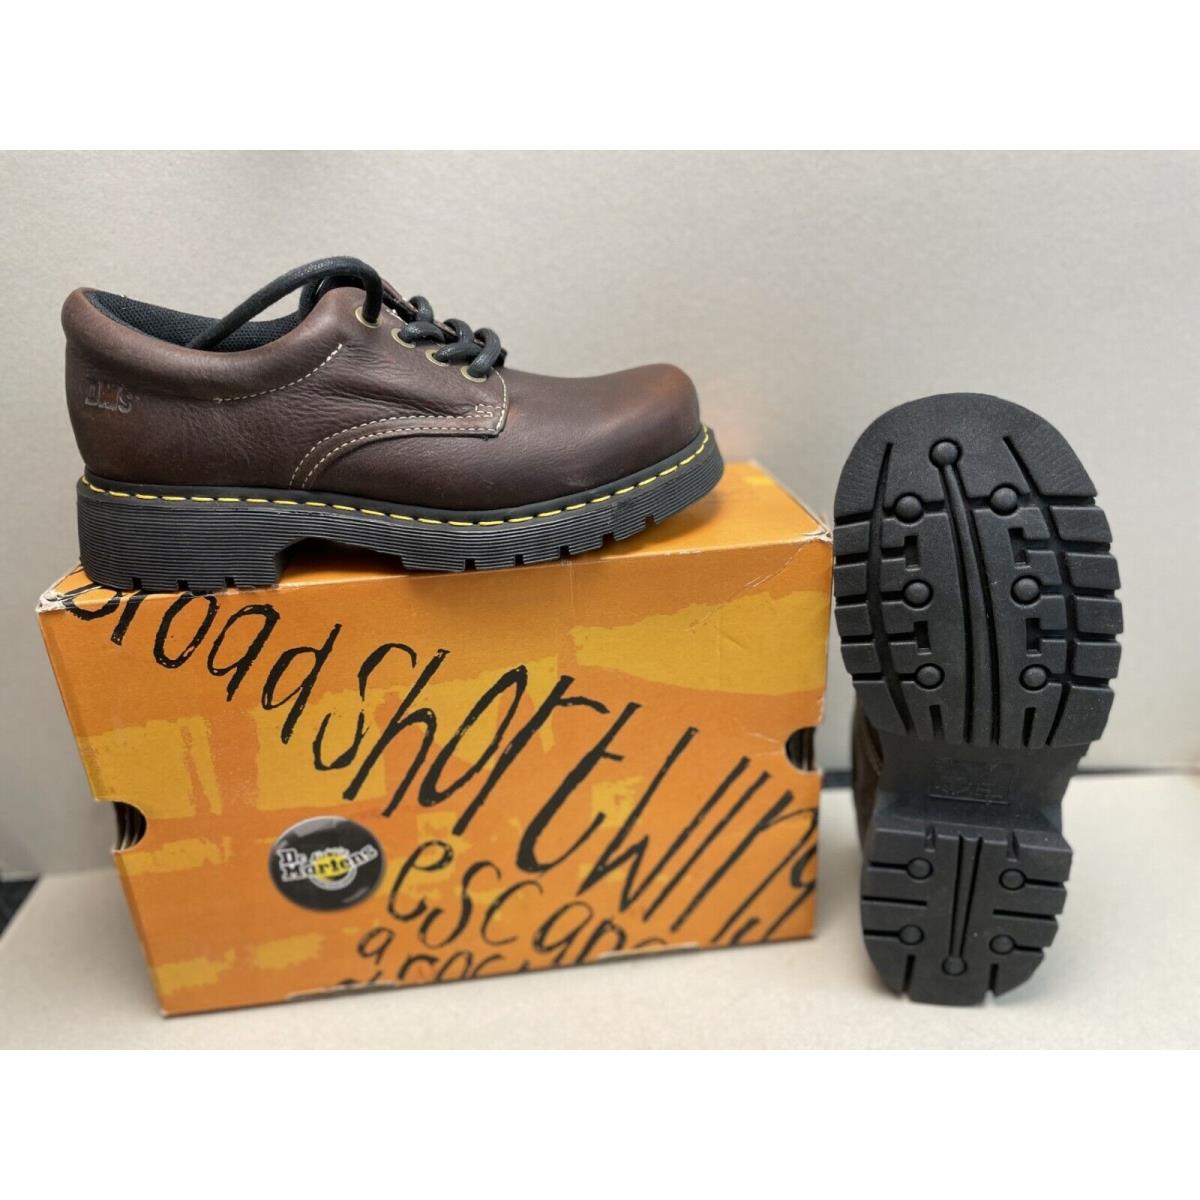 Dr. Martens 9369 Bark Brown Sly Shoe US Men 9 in The Box